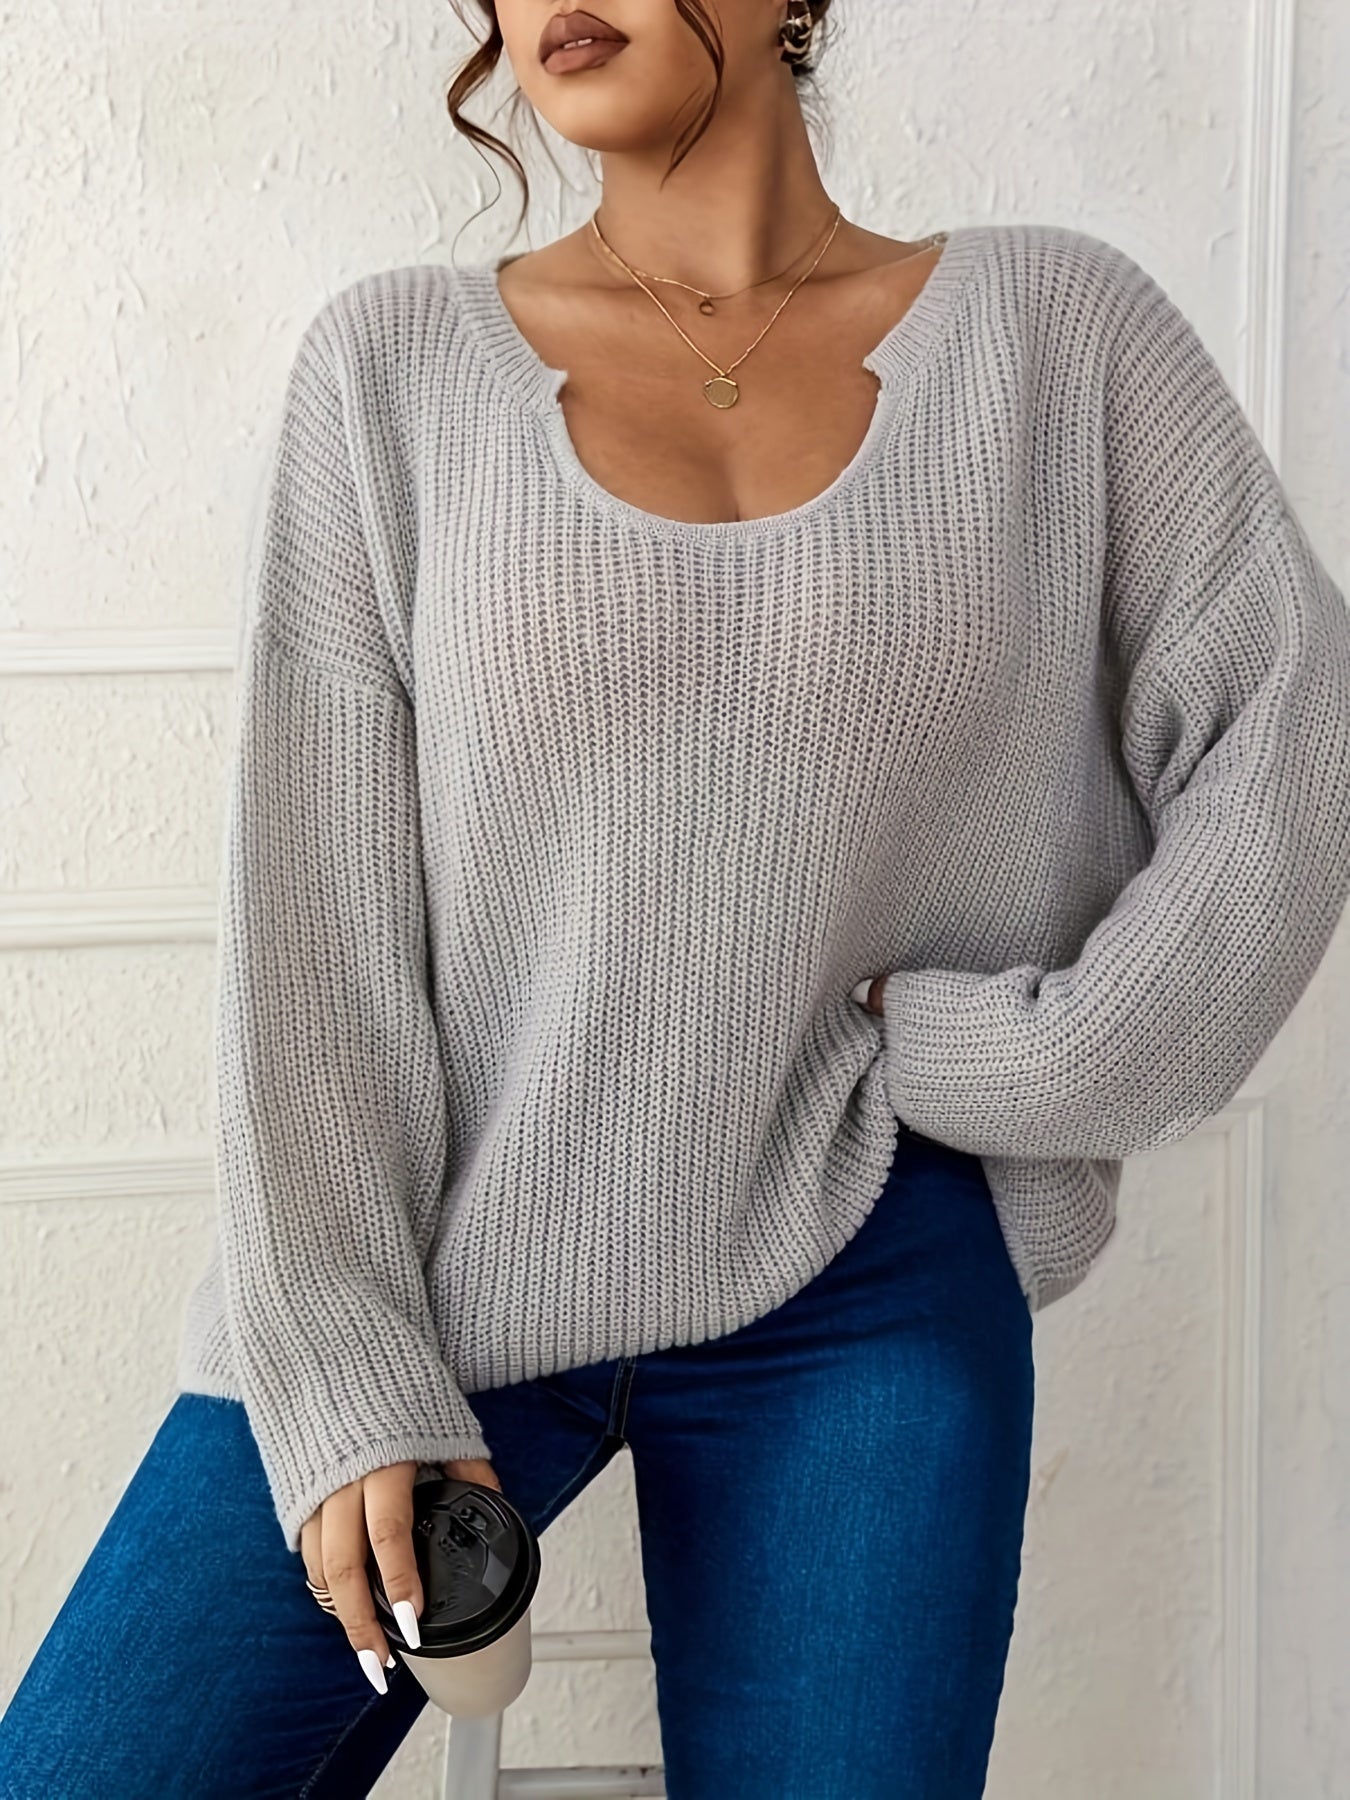 Antmvs Plus Size Casual Knit Top, Women's Plus Notched Neck Long Sleeve Drop Shoulder Slight Stretch Pullover Top